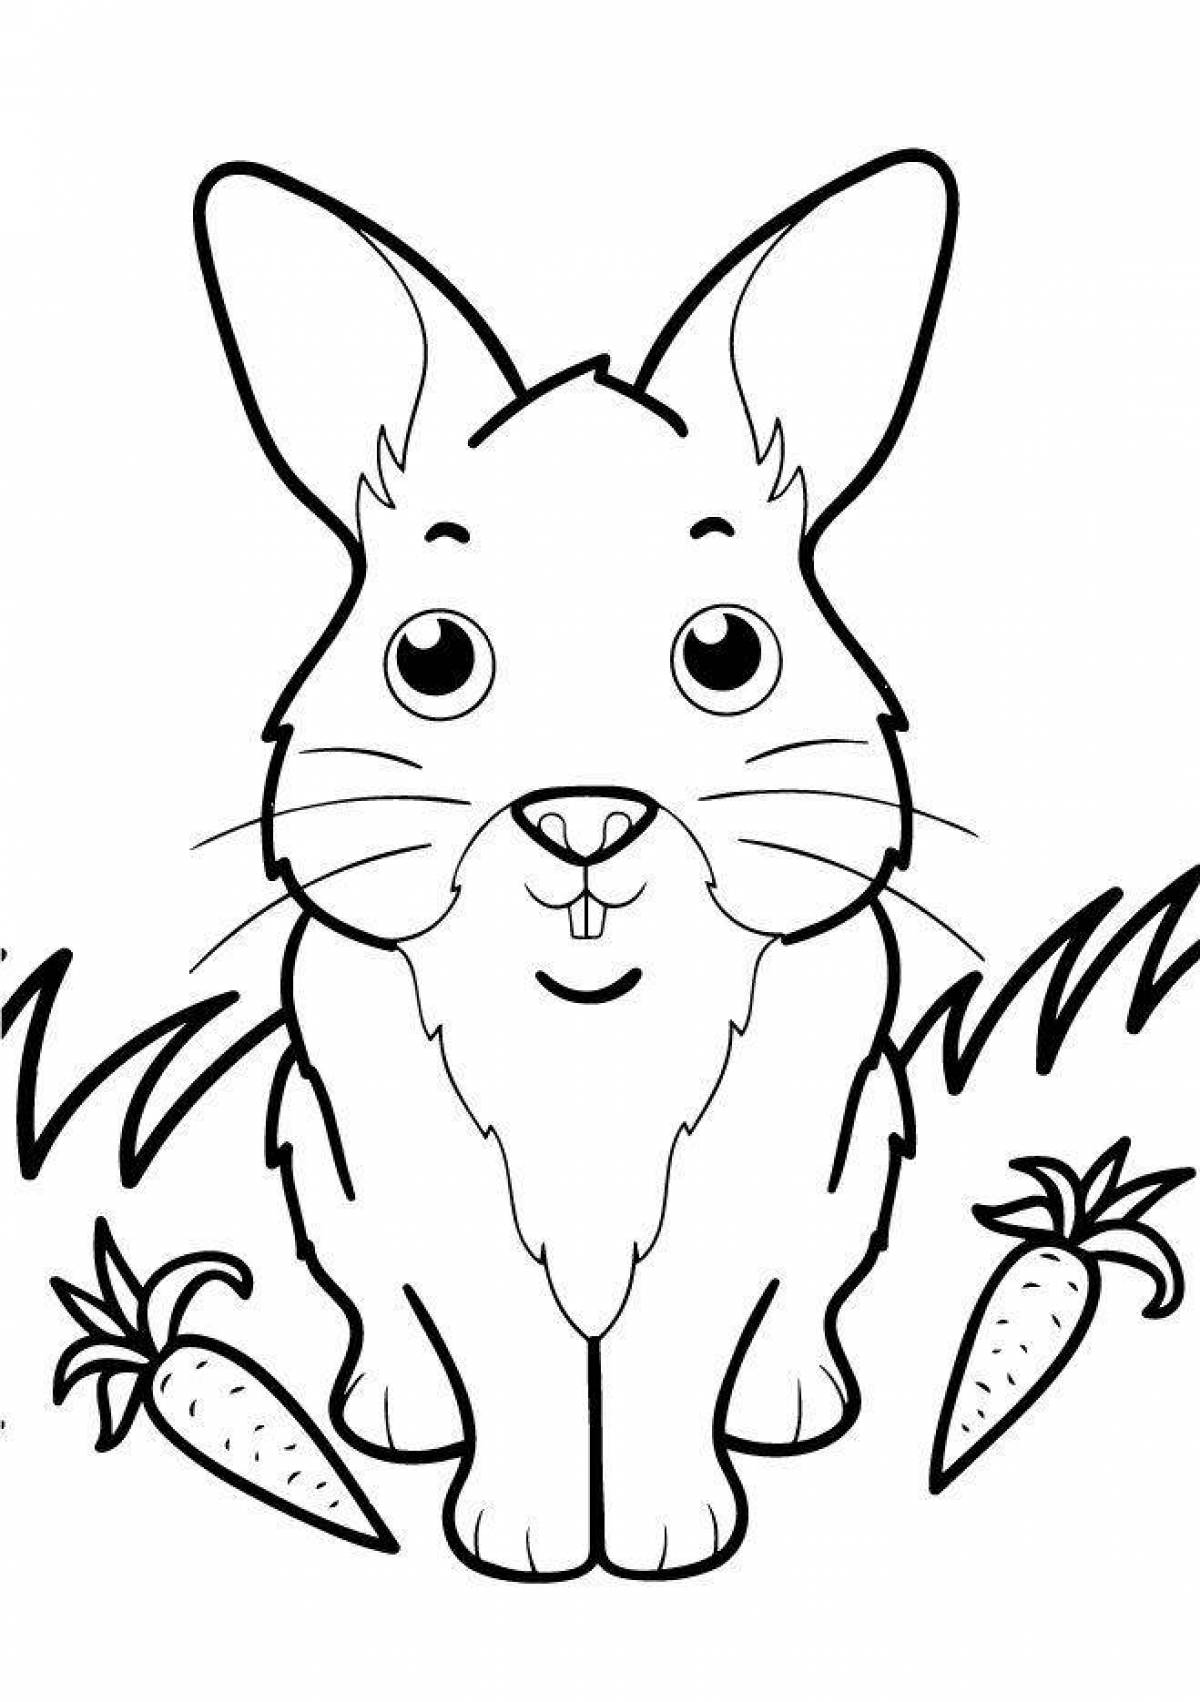 Coloring book cheerful rabbit with carrots